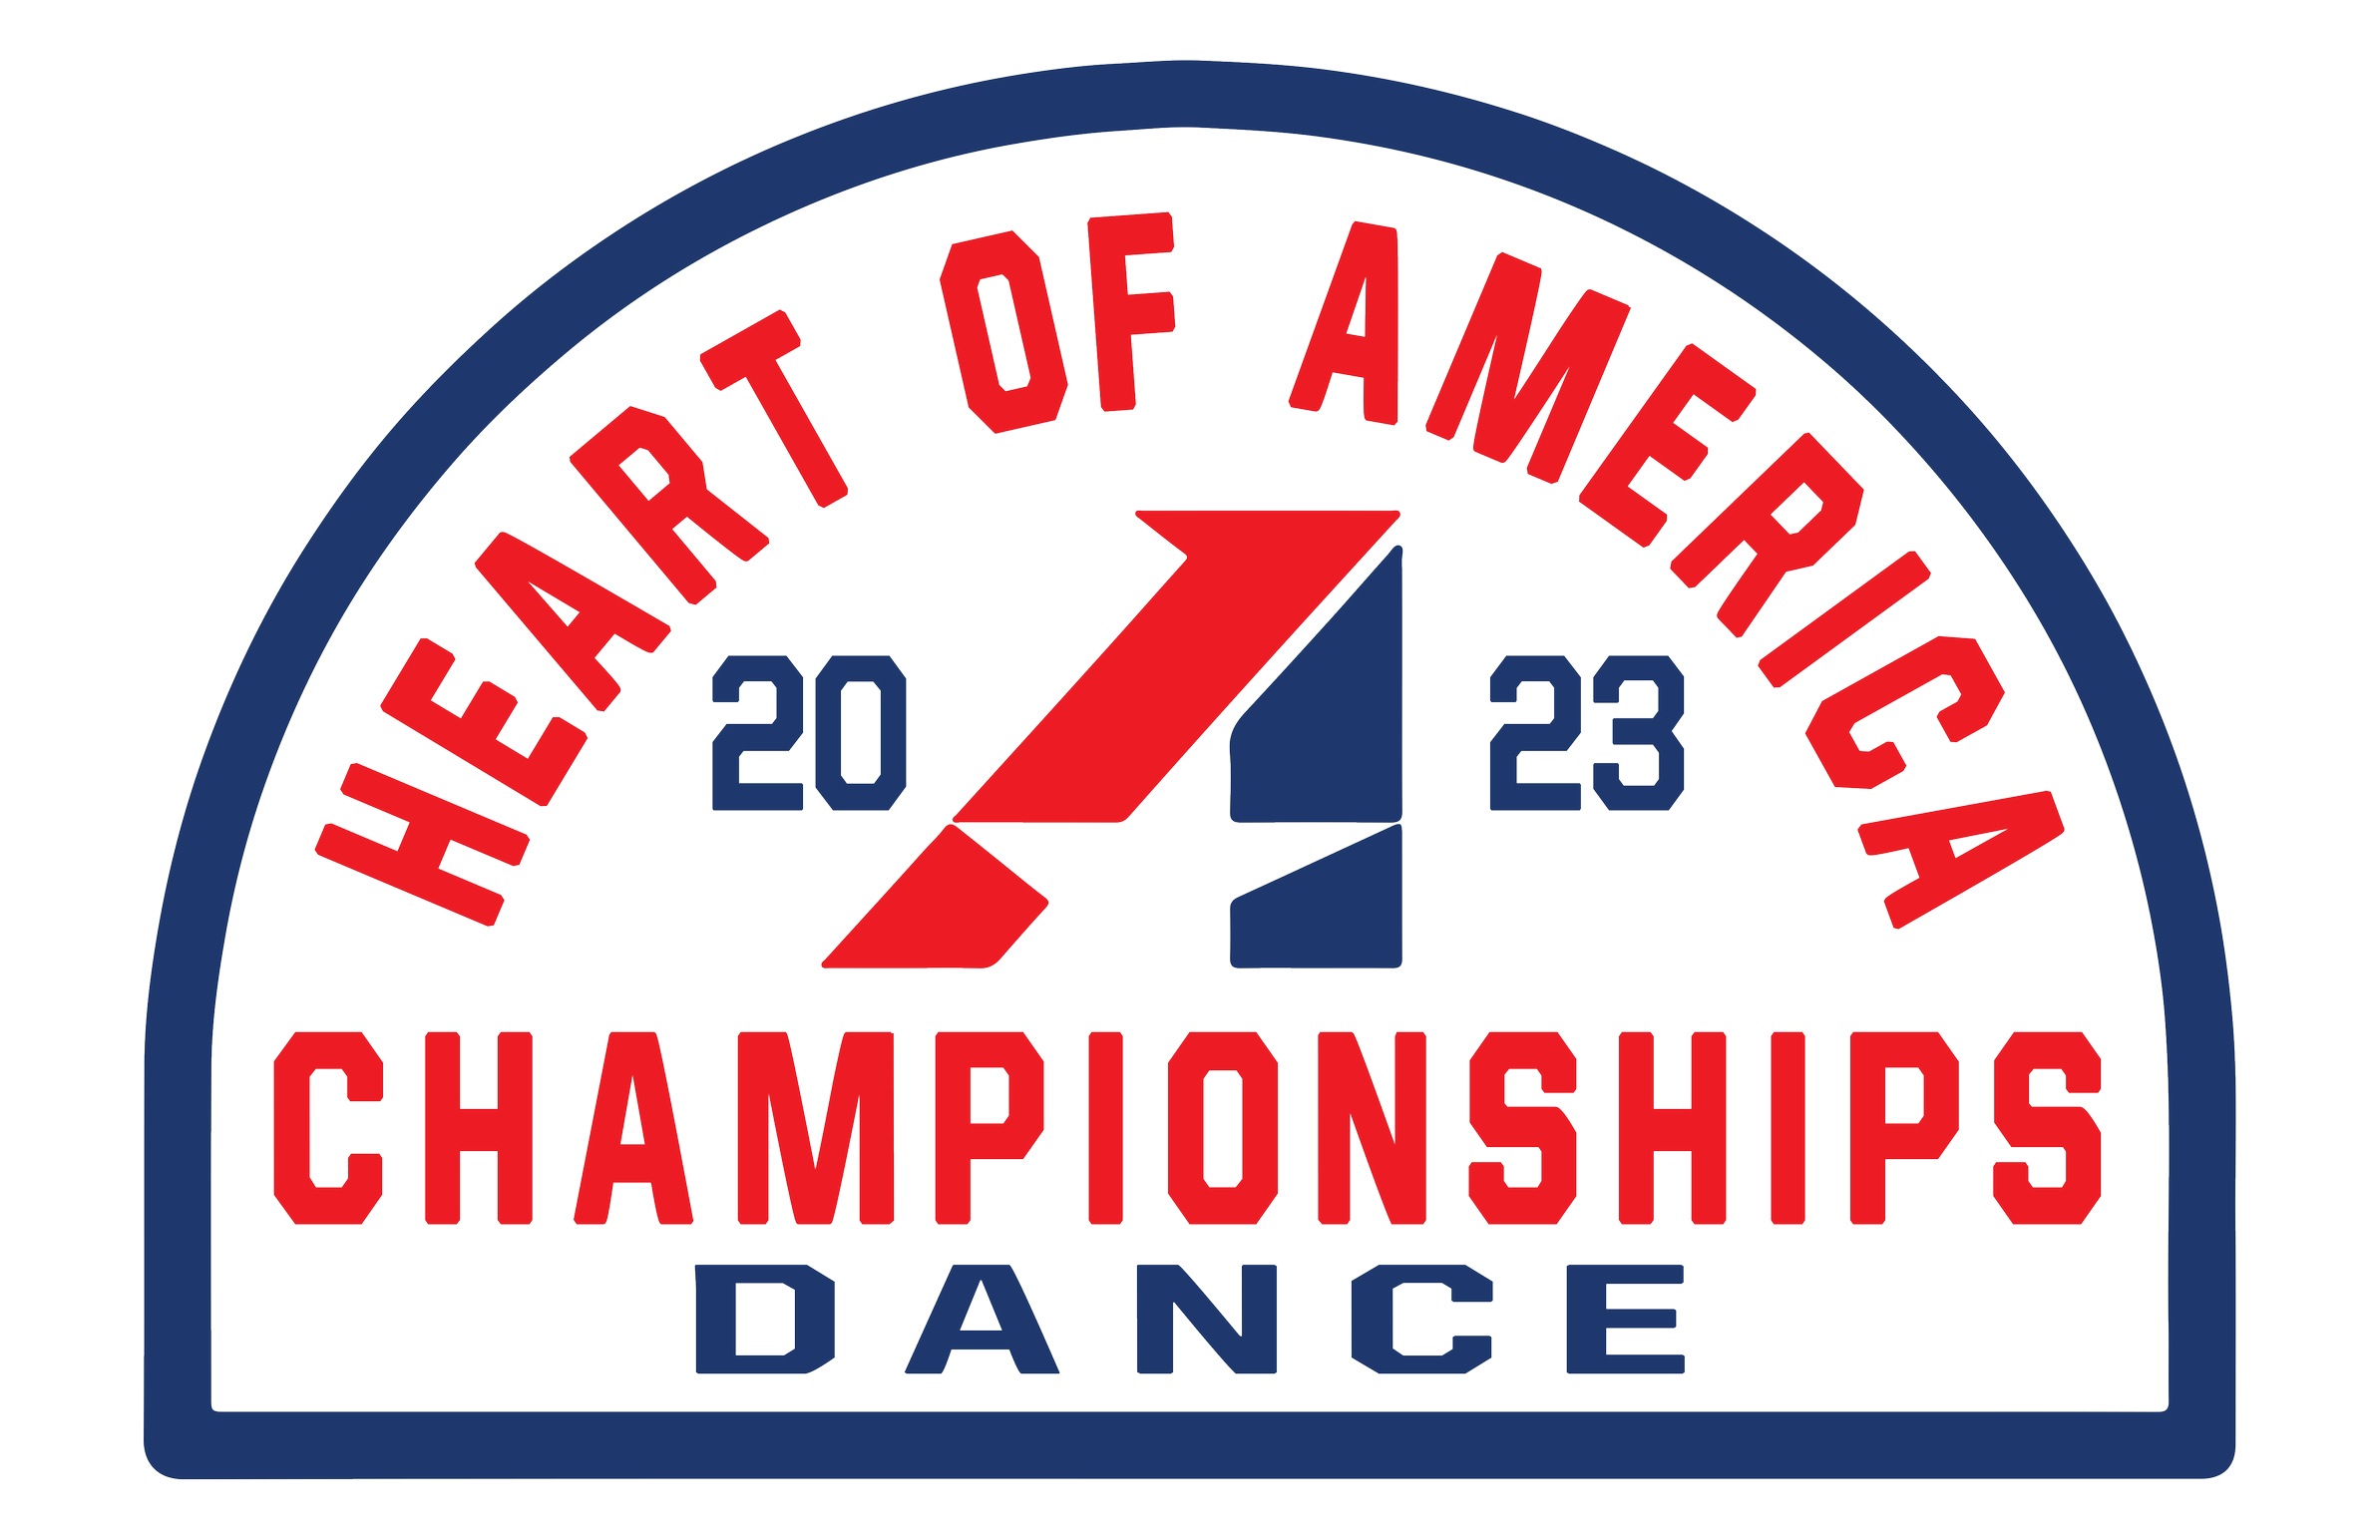 Competitive Dance Championships logo